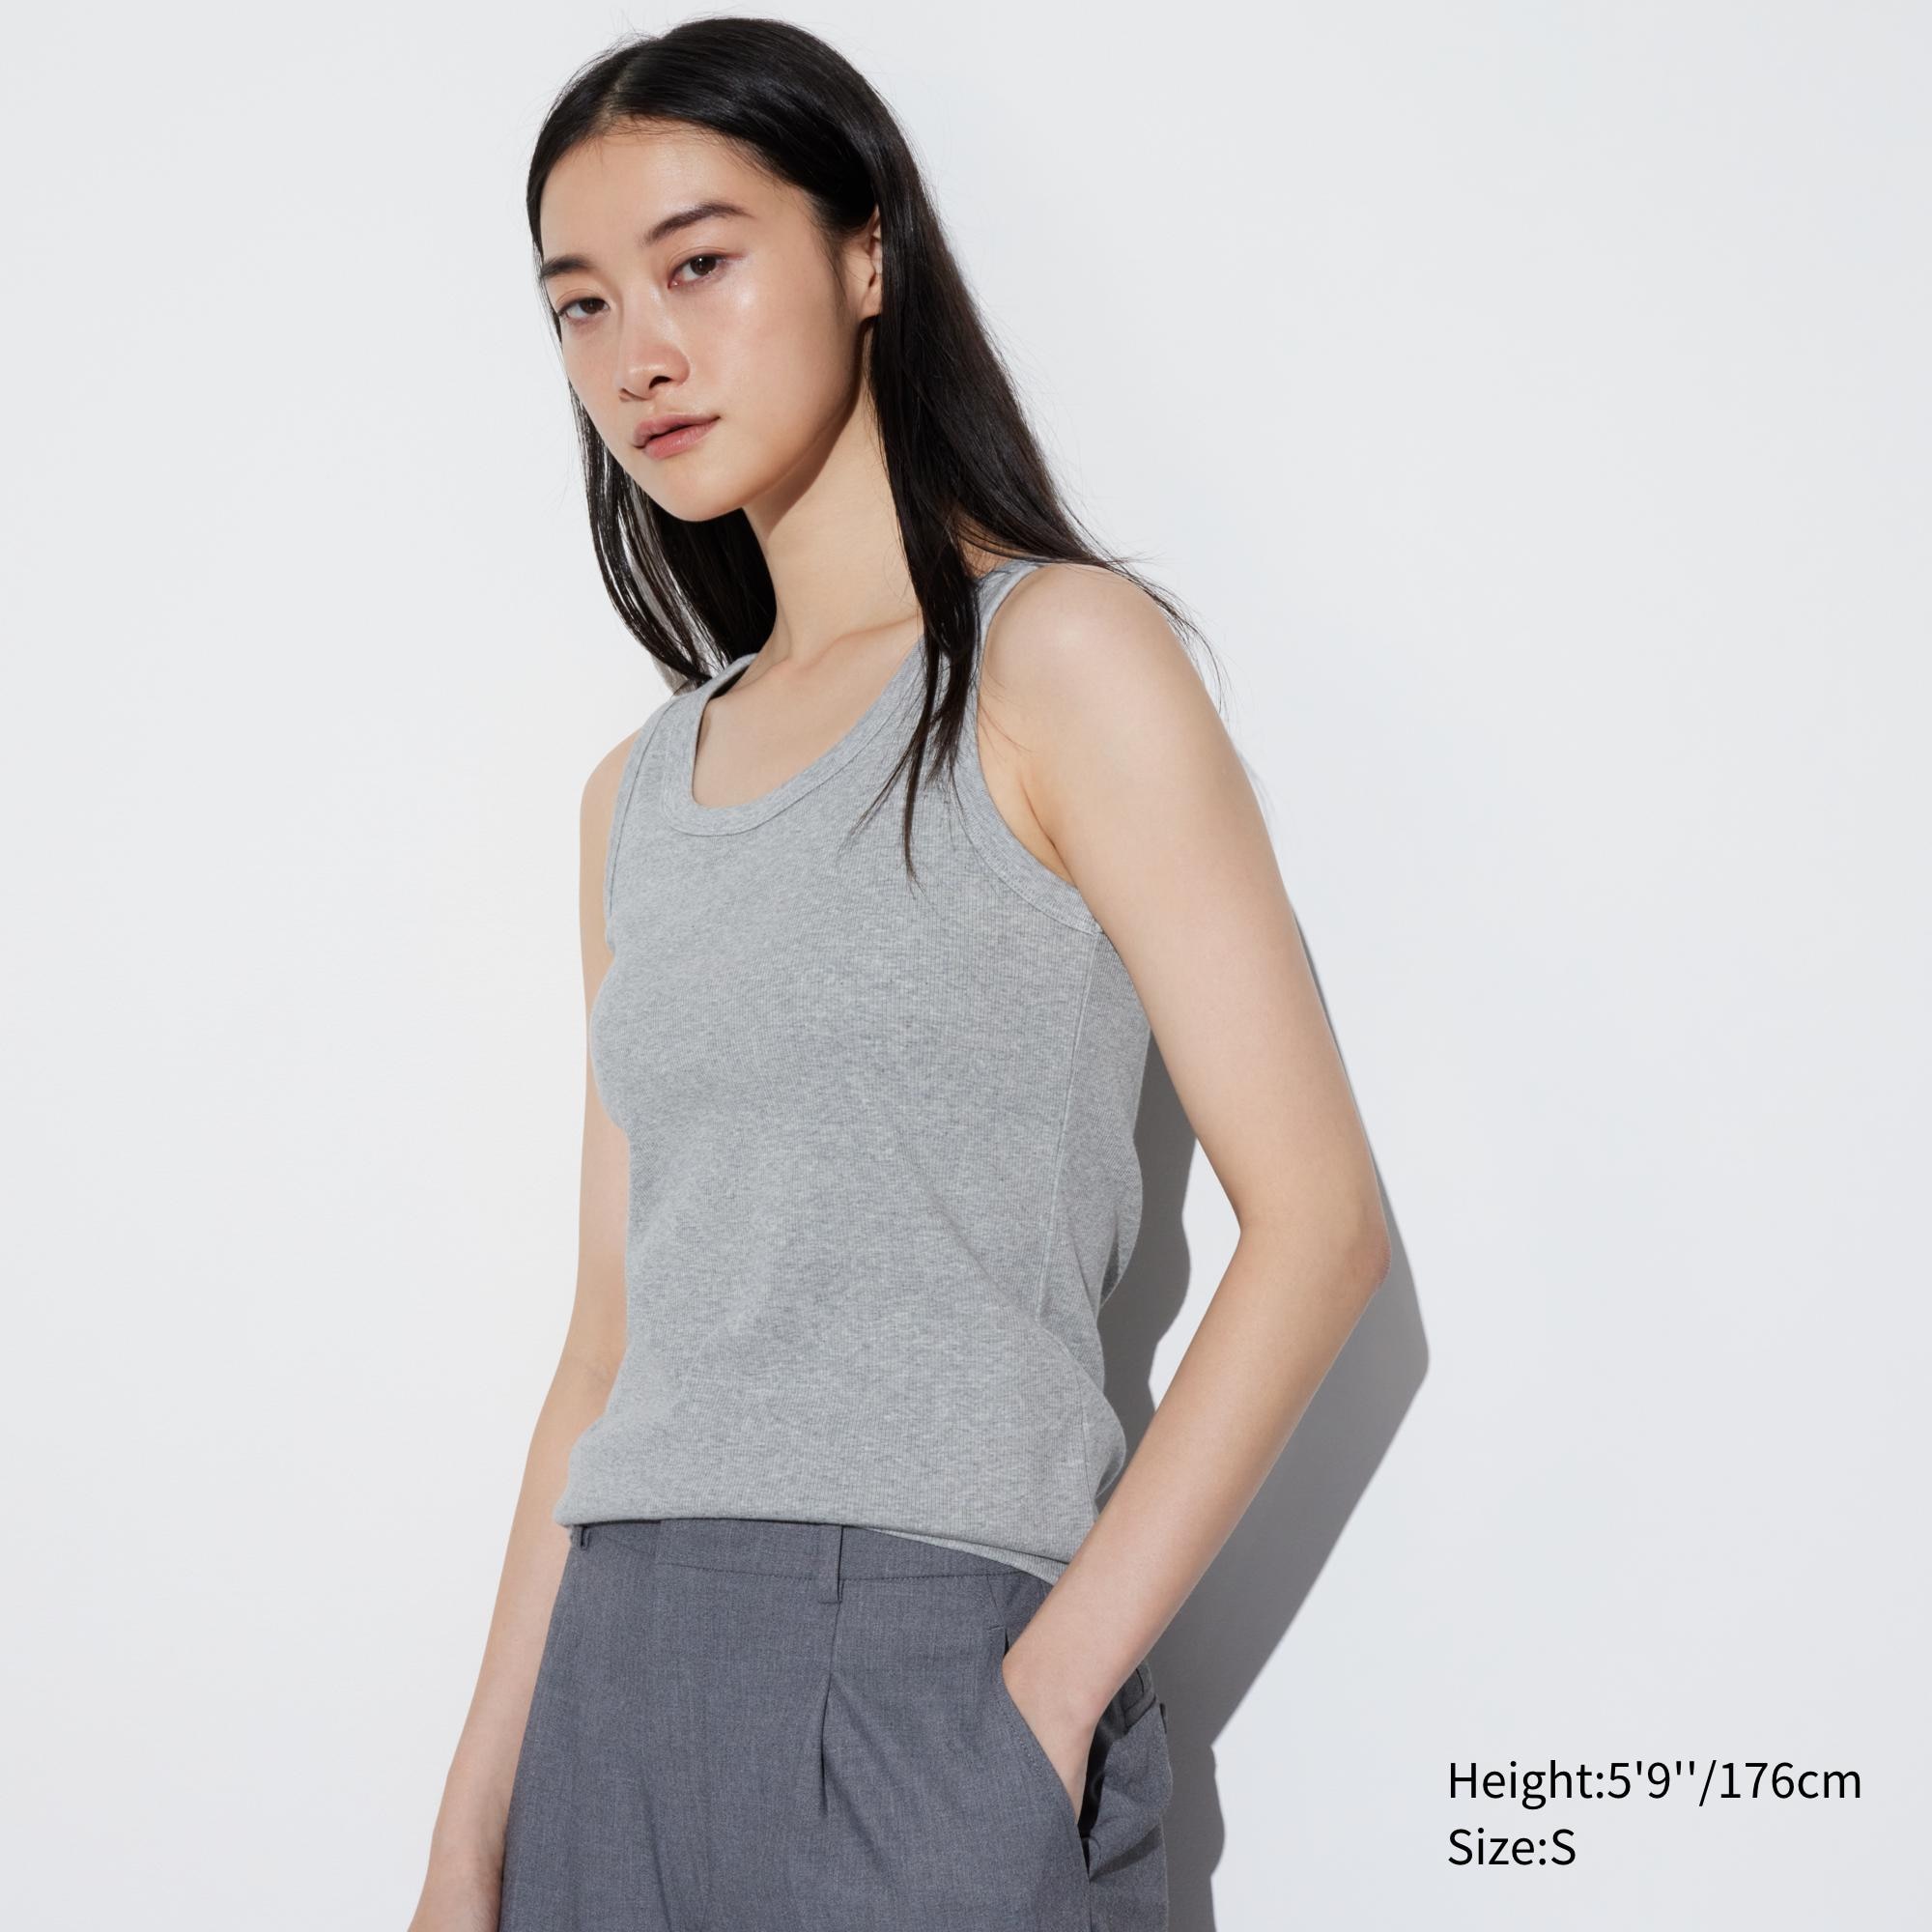 Reviewing the UNIQLO bra tank top 💕 This classic ribbed tank top has